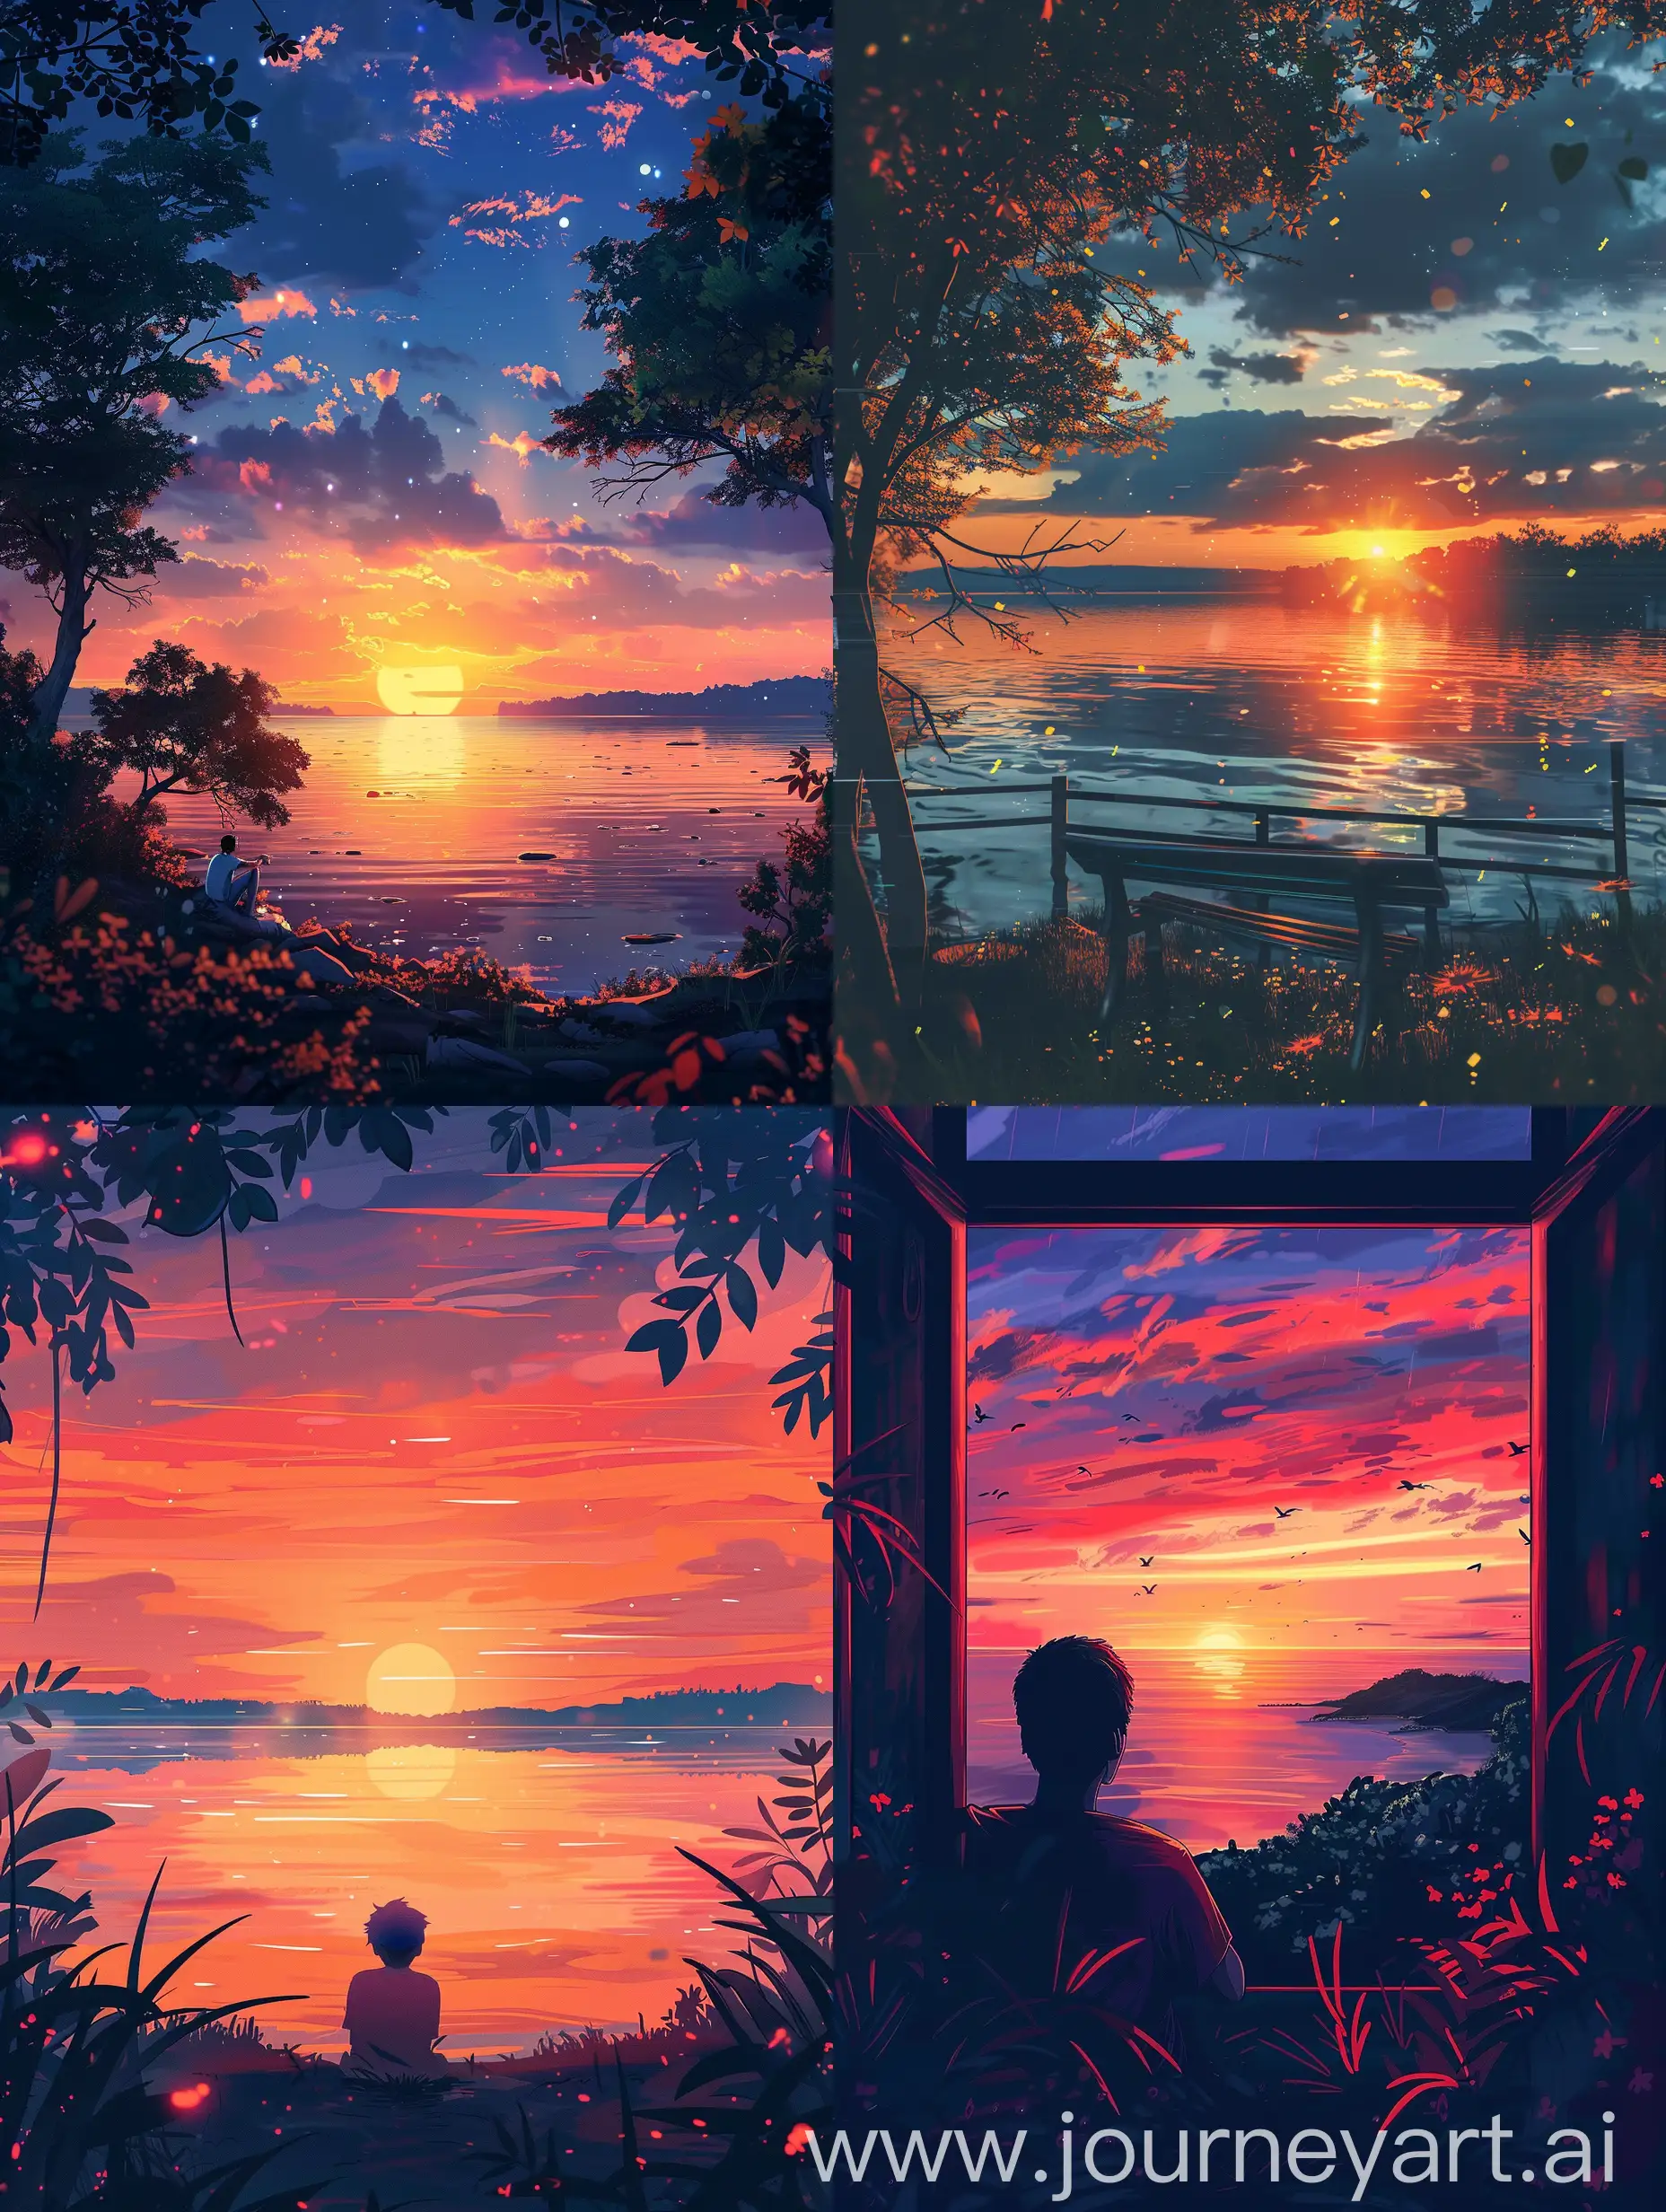 Tranquil-Sunset-Over-Nature-Restful-Illustration-with-Beautiful-Stylized-Art